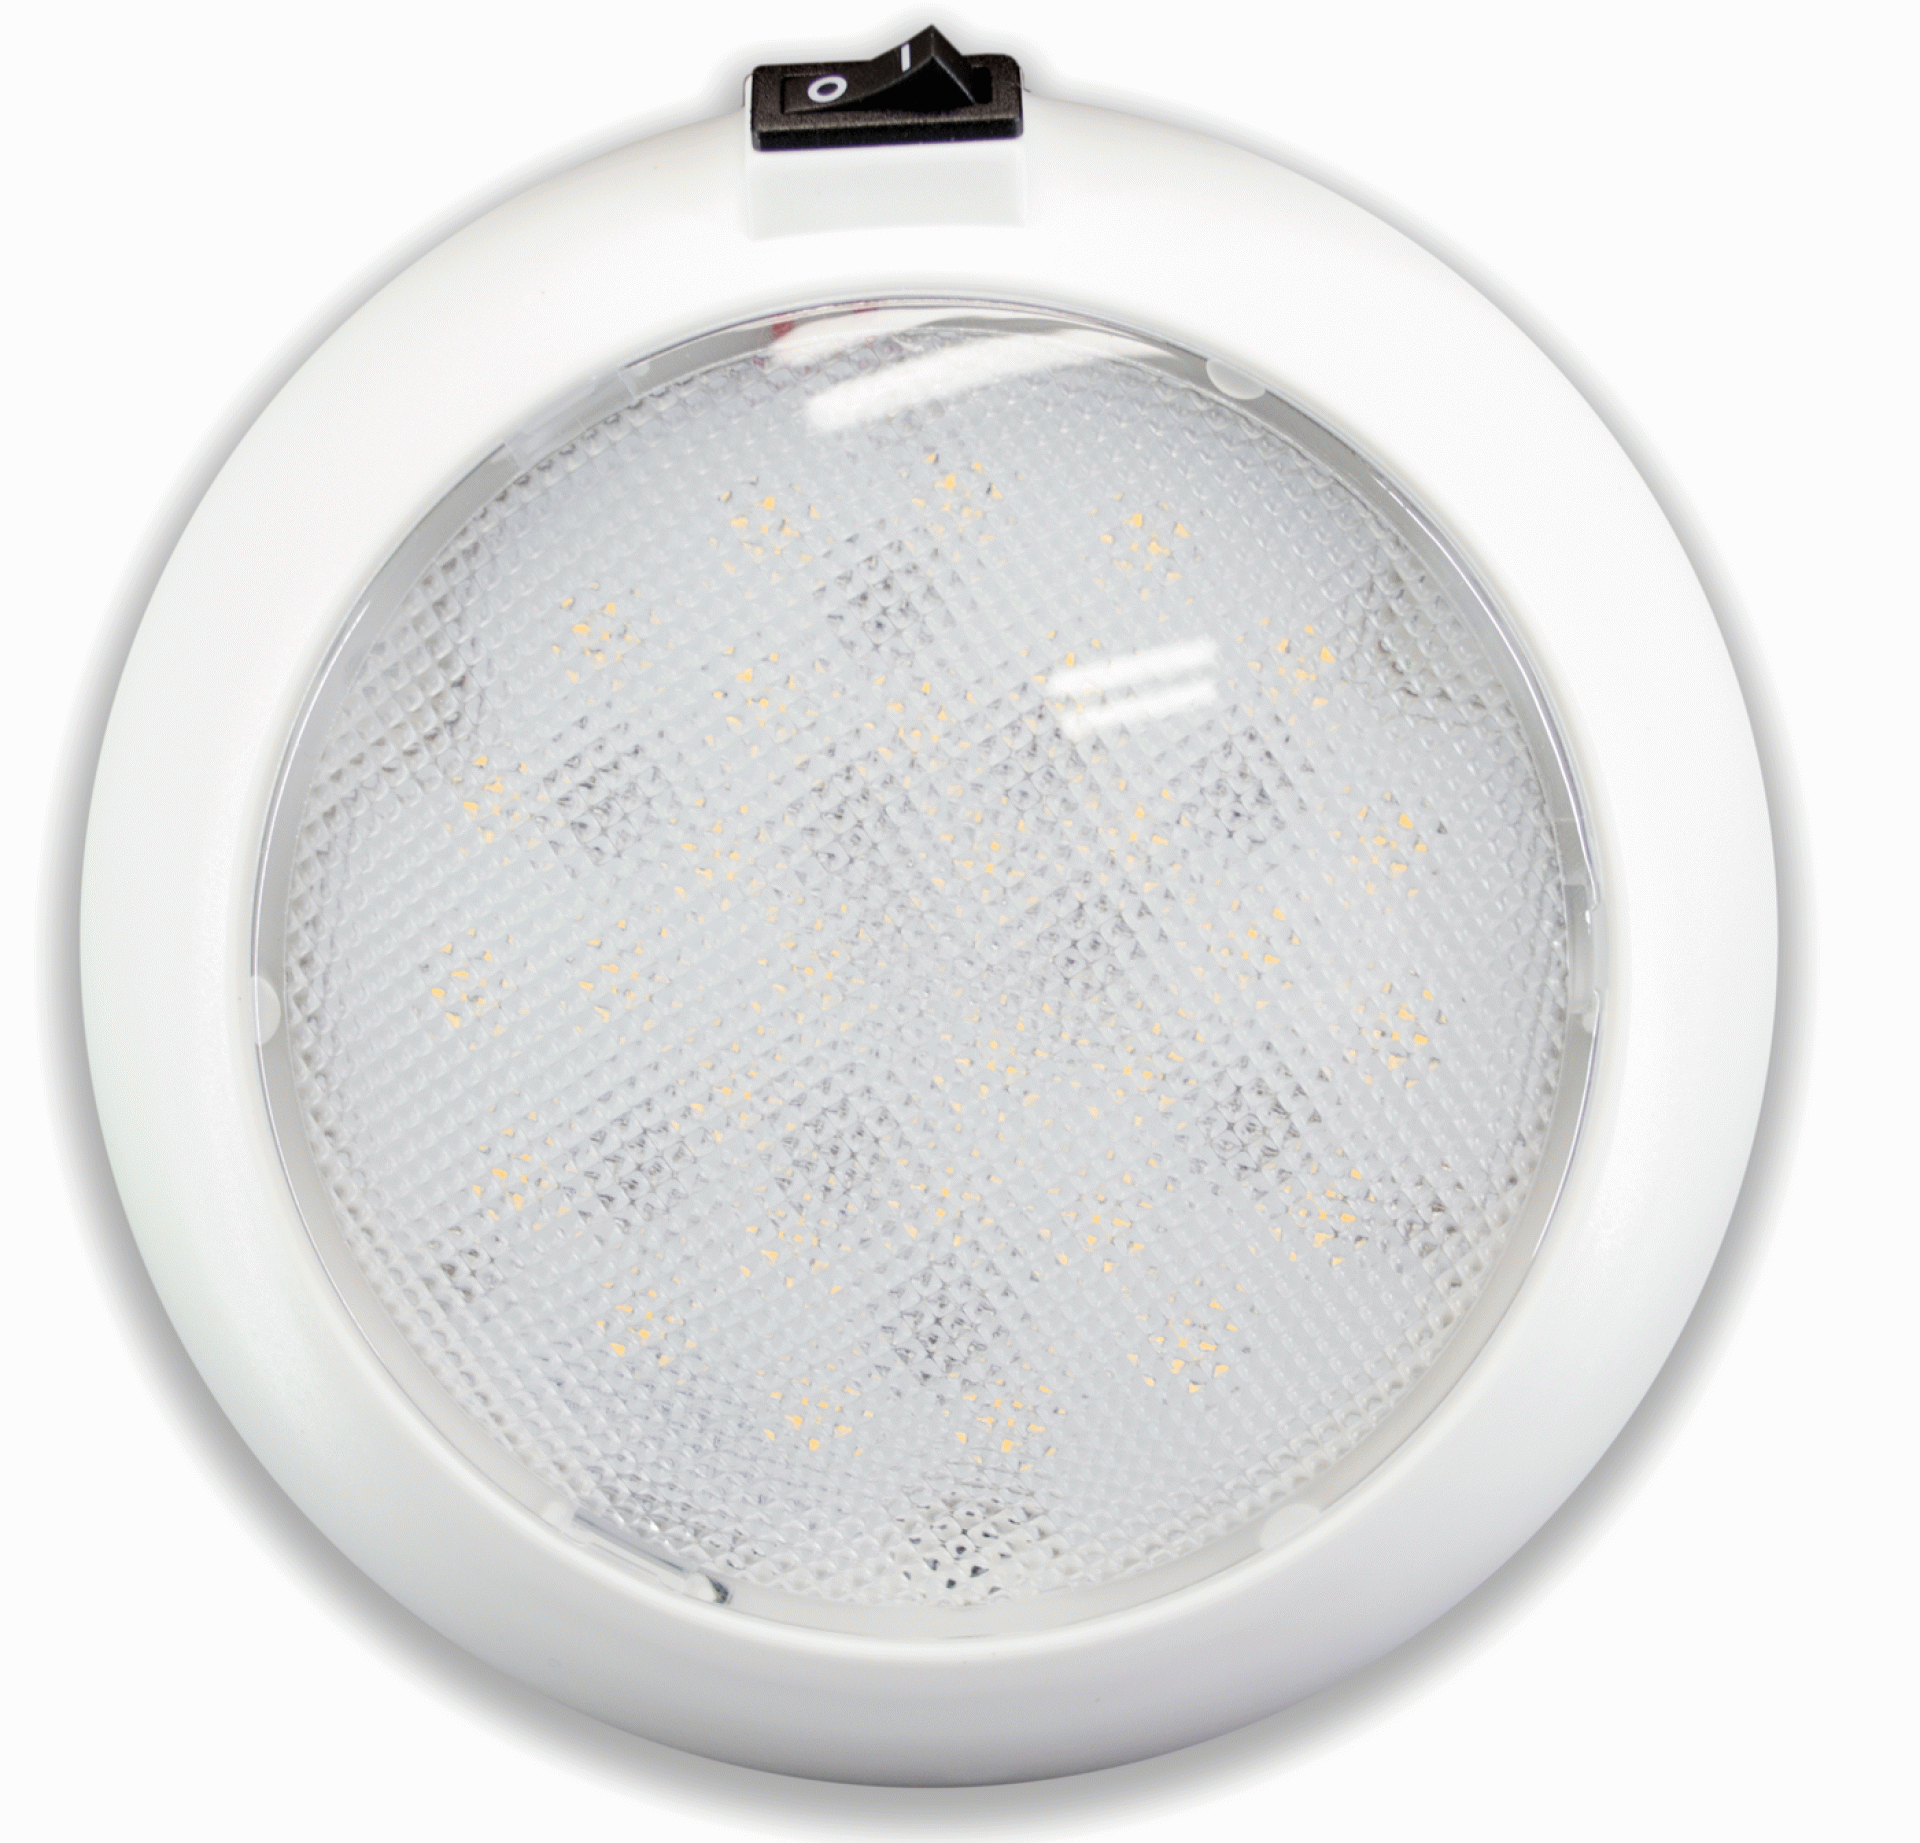 INNOVATIVE LIGHTING INC. | 064-5140-7 | ROUND DOME LIGHT 21 WHITE/9 RED LED W/ SWITCH WHITE HOUSING